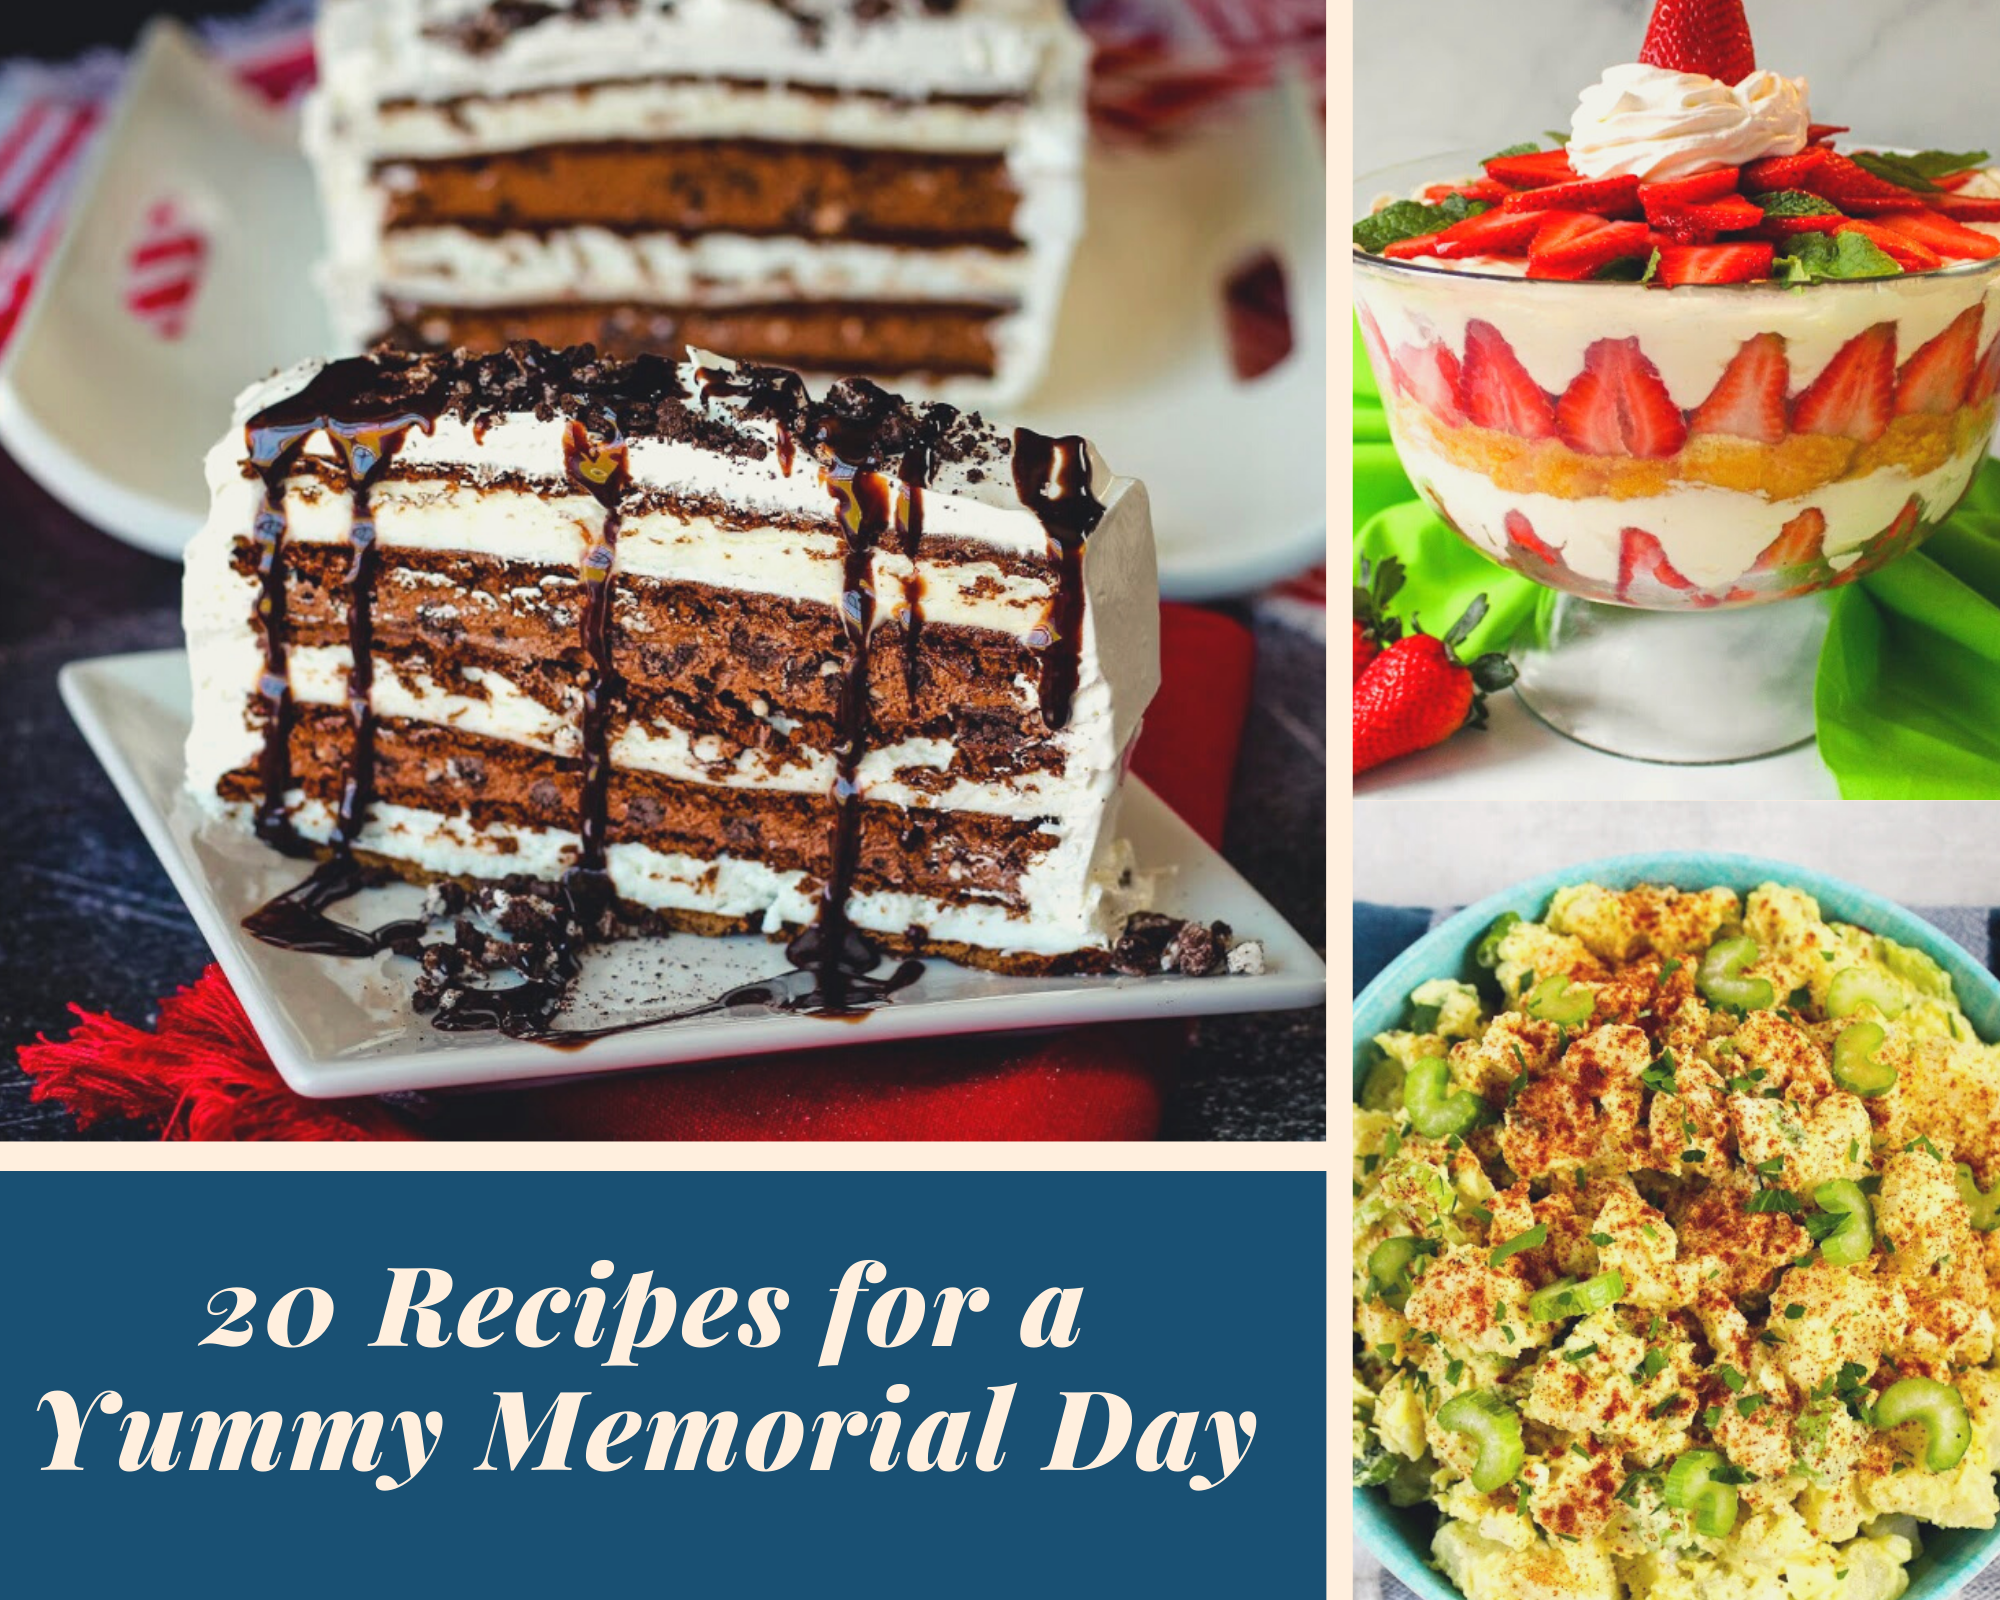 Memorial day desserts and side dishes